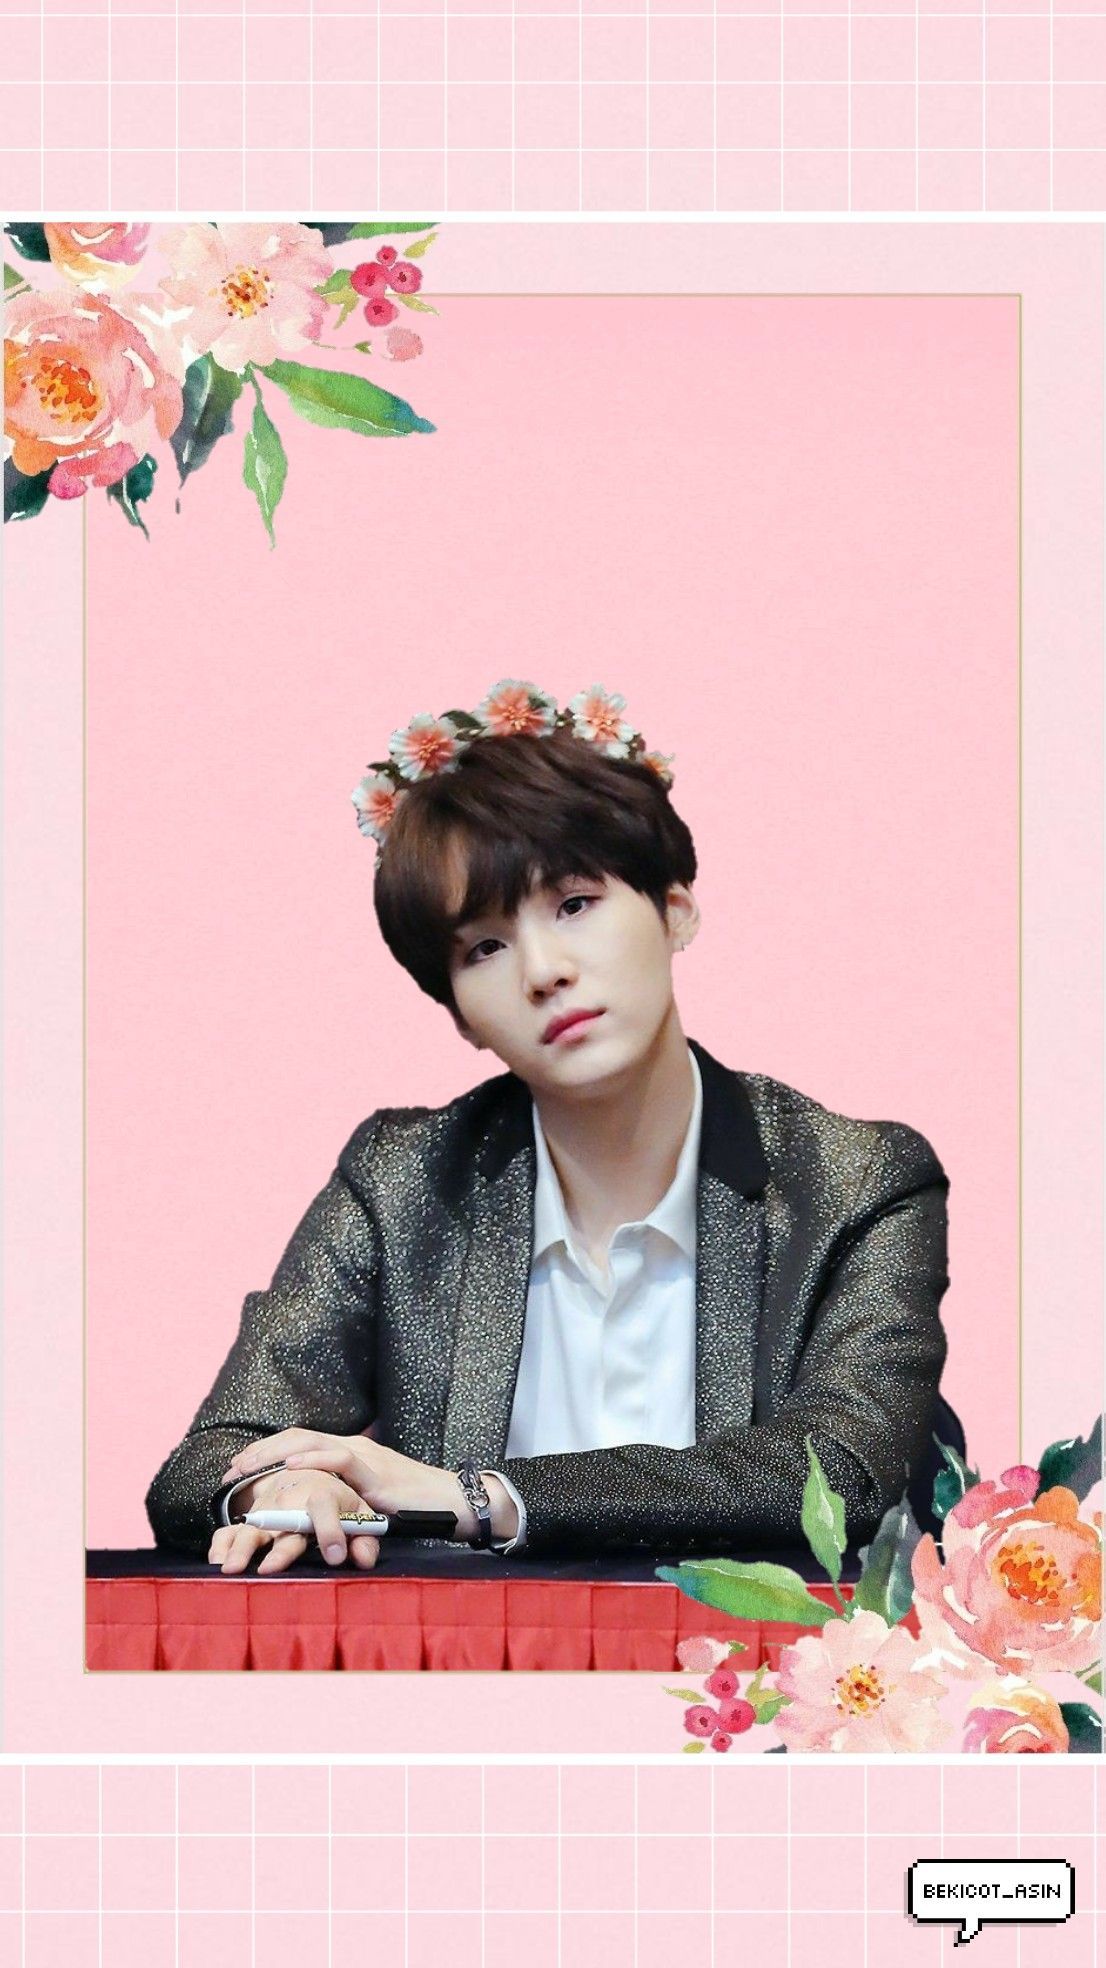 Flower and yoongi is a total beauty ❤ #wallpaper #yoongi #min